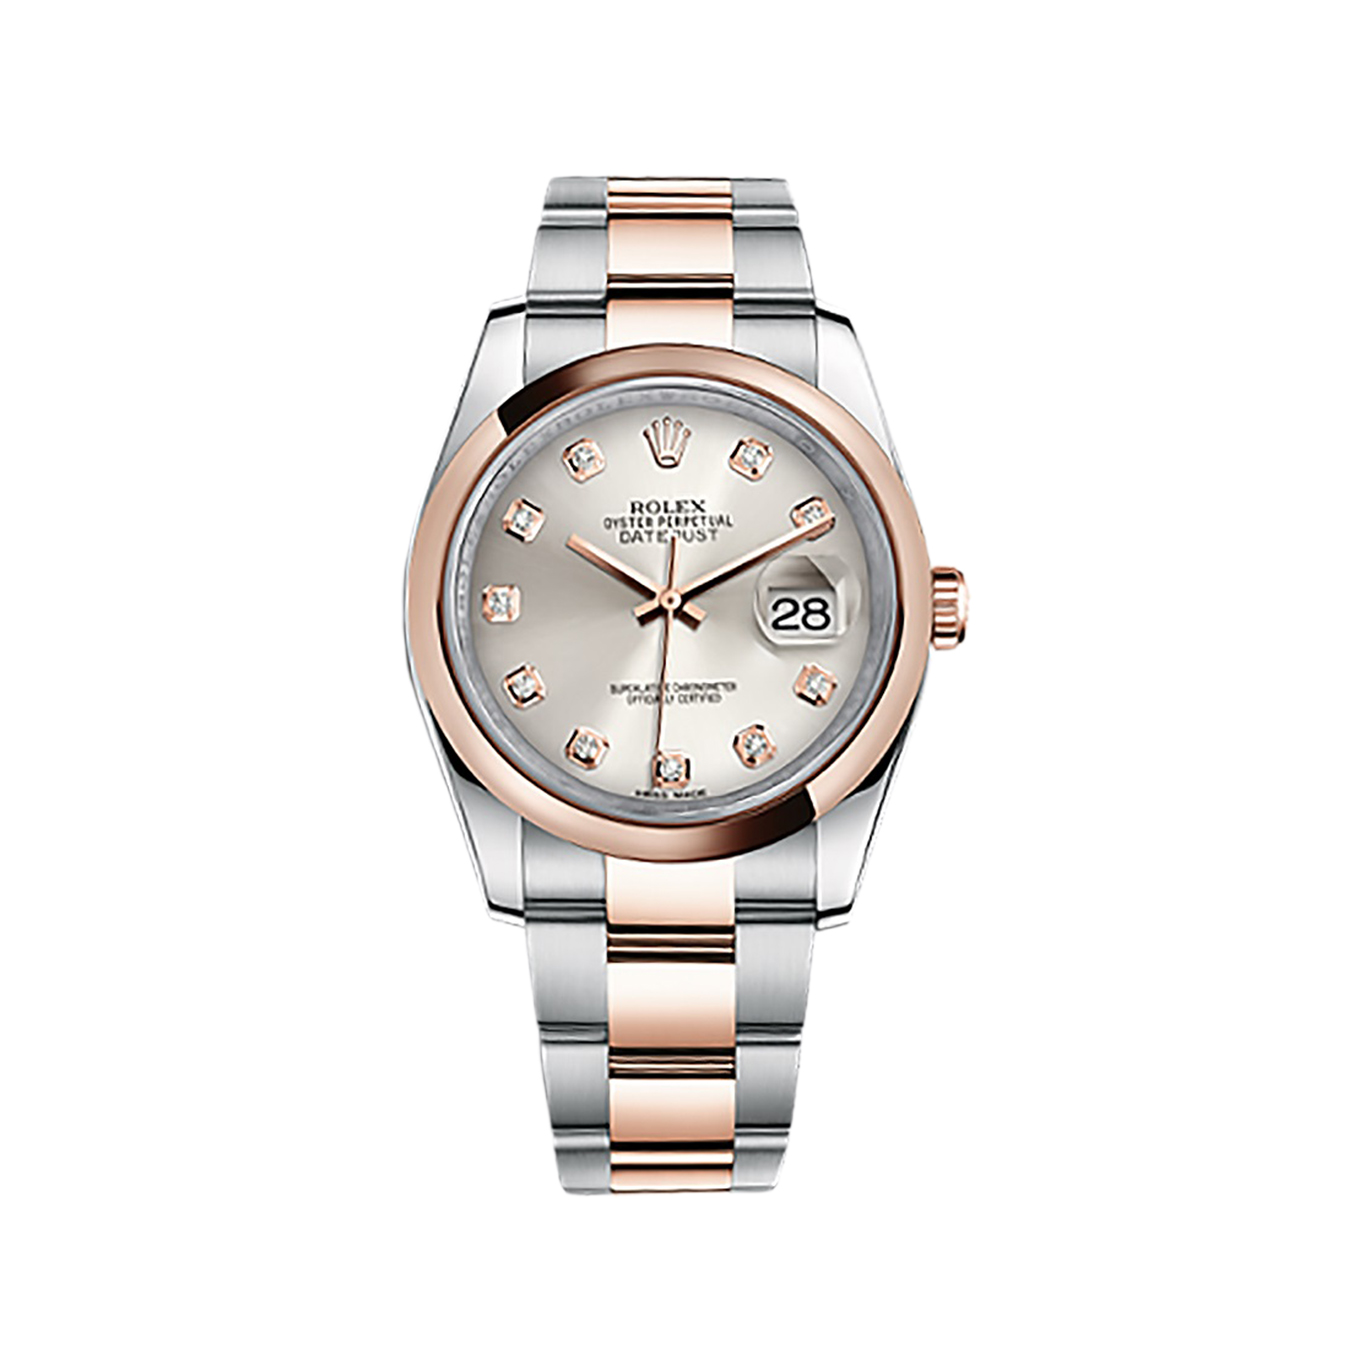 Datejust 36 116201 Rose Gold & Stainless Steel Watch (Silver Set with Diamonds)